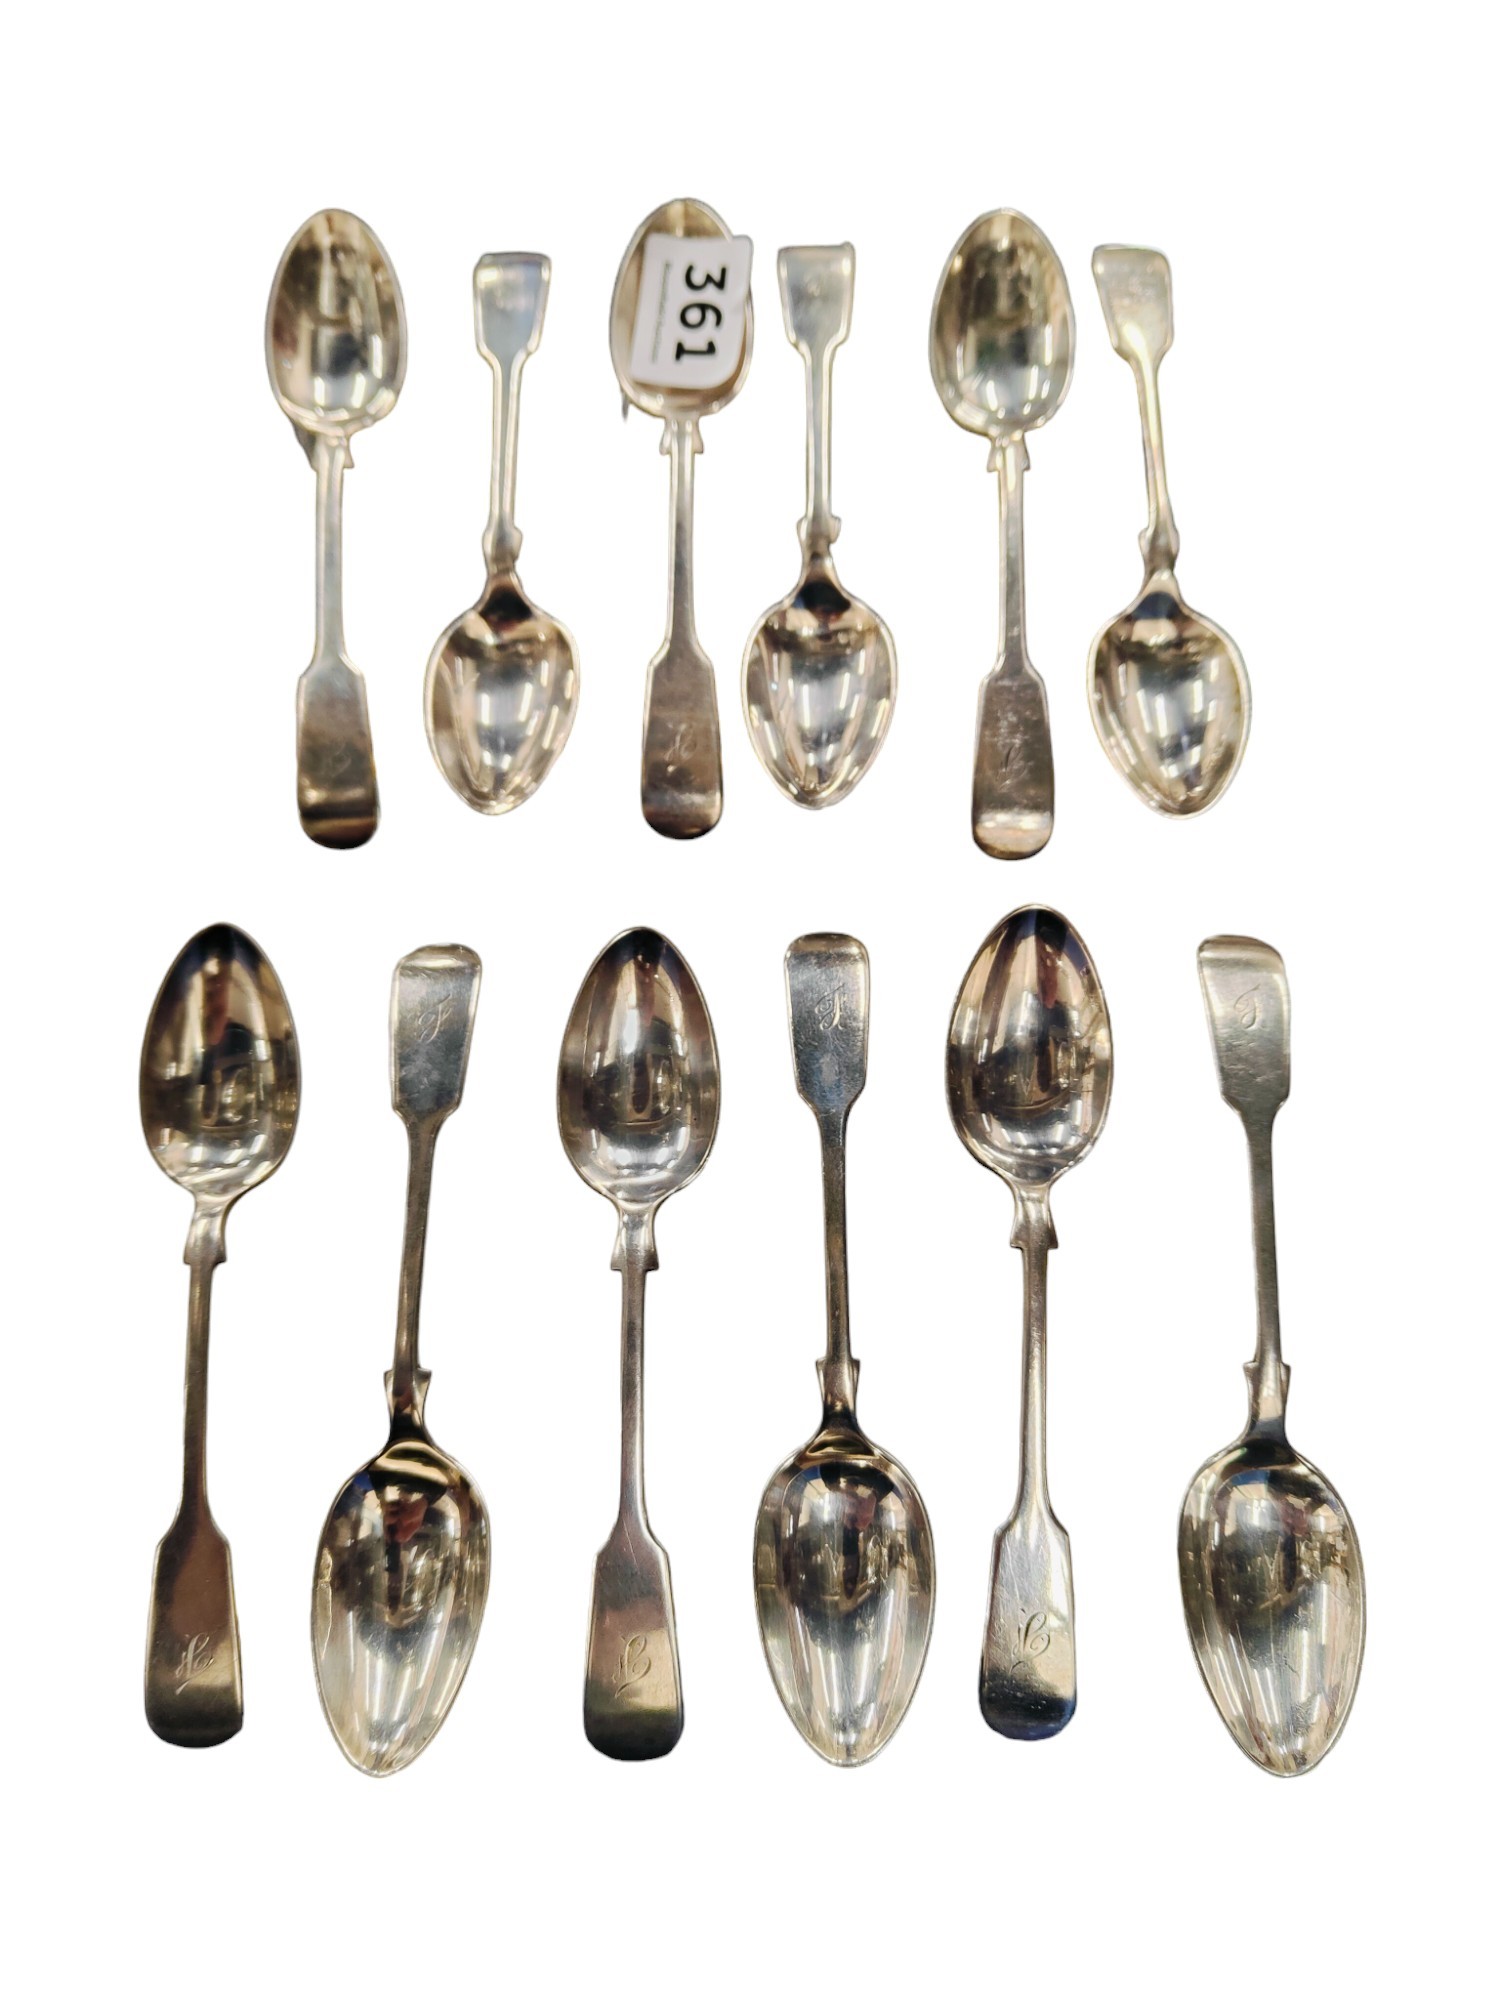 SET OF 12 ANTIQUE SILVER TEA SPOONS SHEFFIELD 1908/09 CIRCA 273 GRAMS BY JOH ROUND & SON LTD